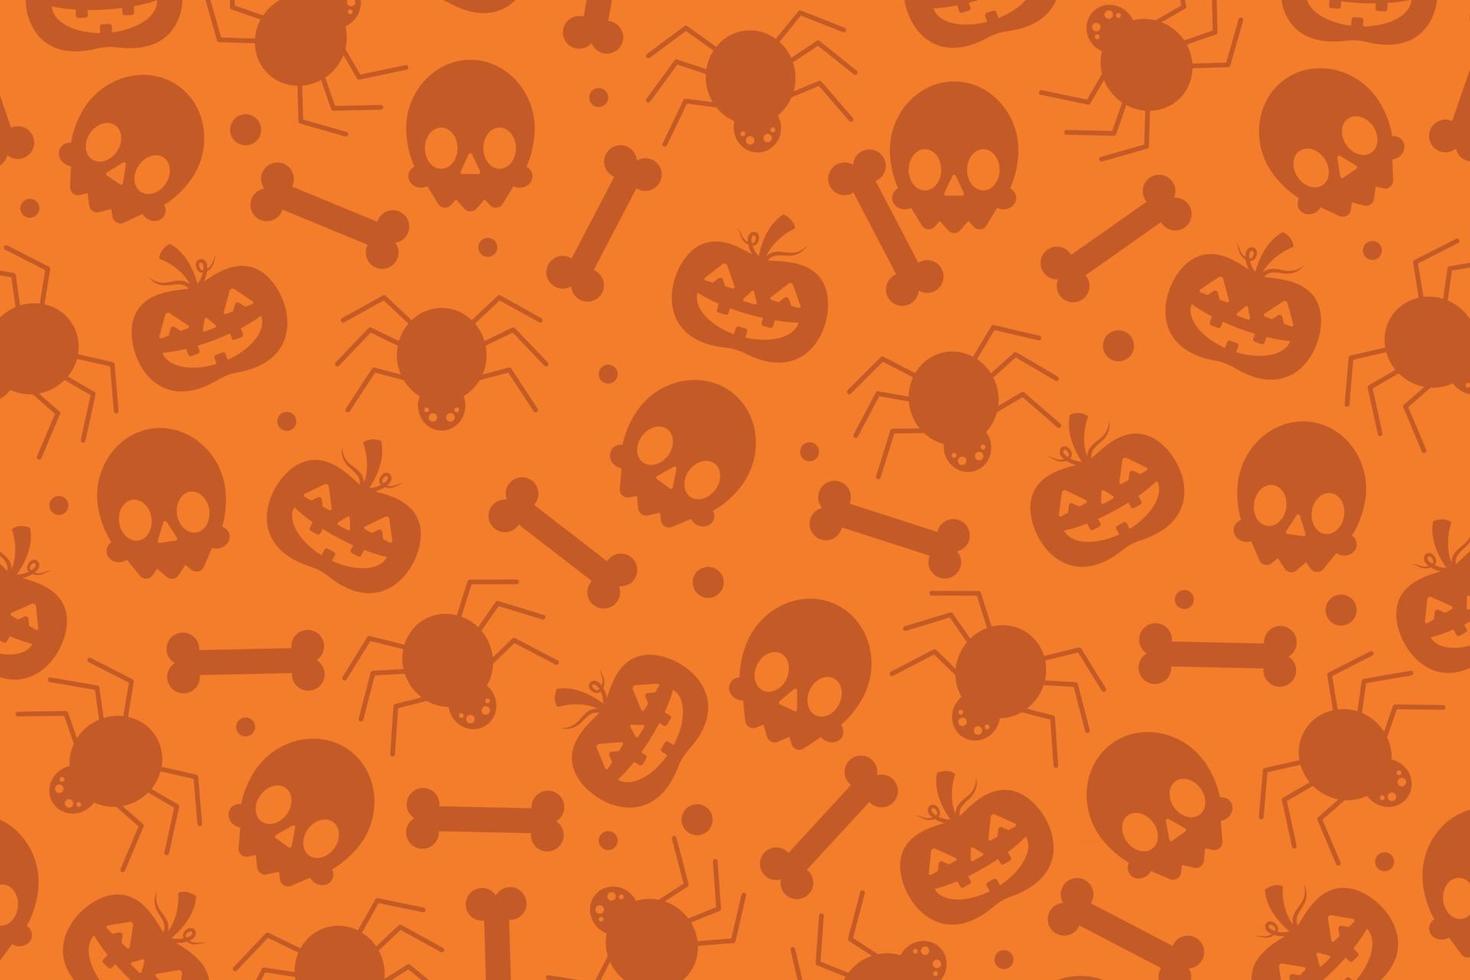 halloween background template with scary pumpkin face vector